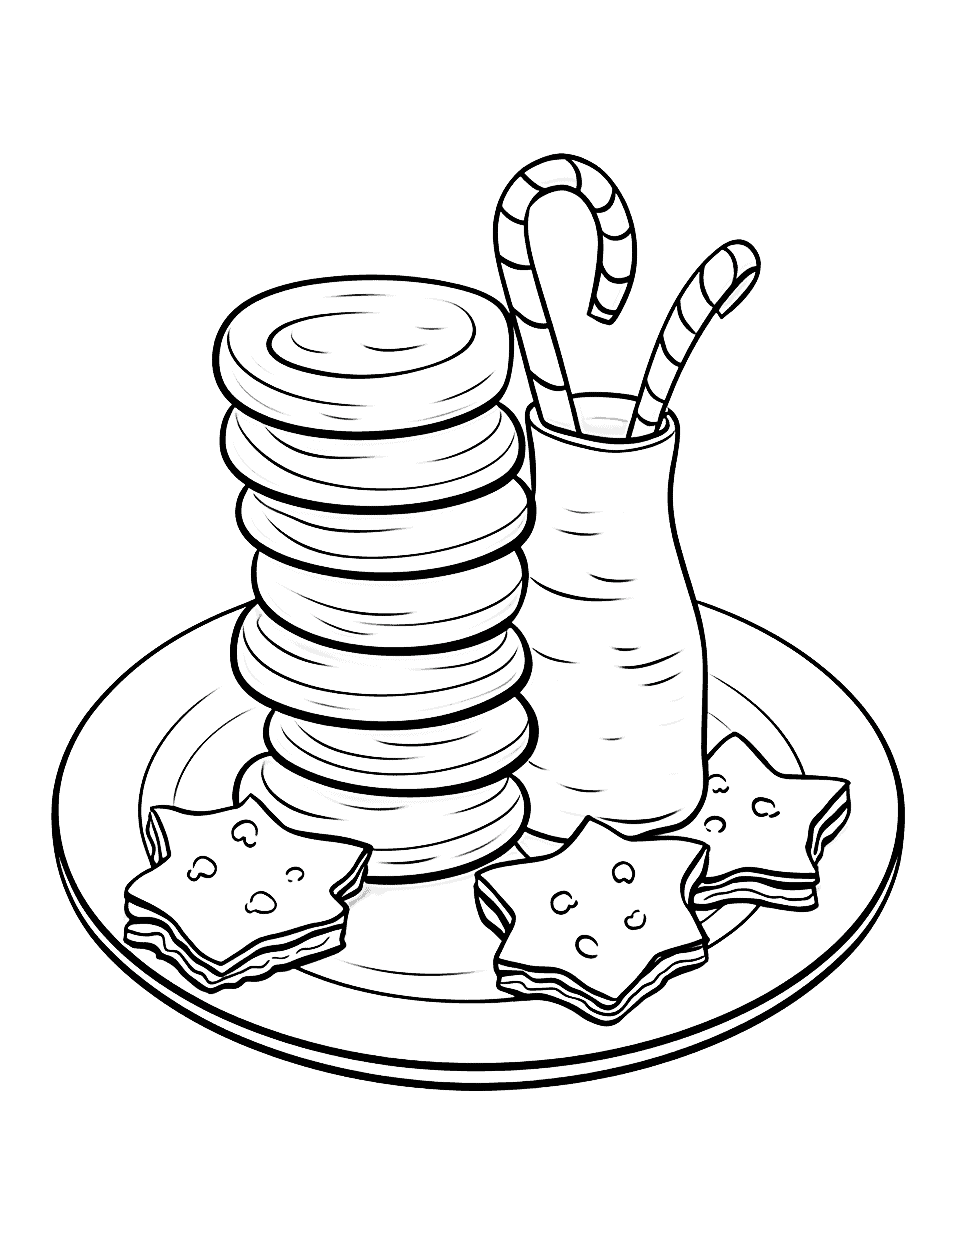 Christmas Cookies for Santa Coloring Page - A plate of Christmas cookies and a glass of milk left out for Santa.